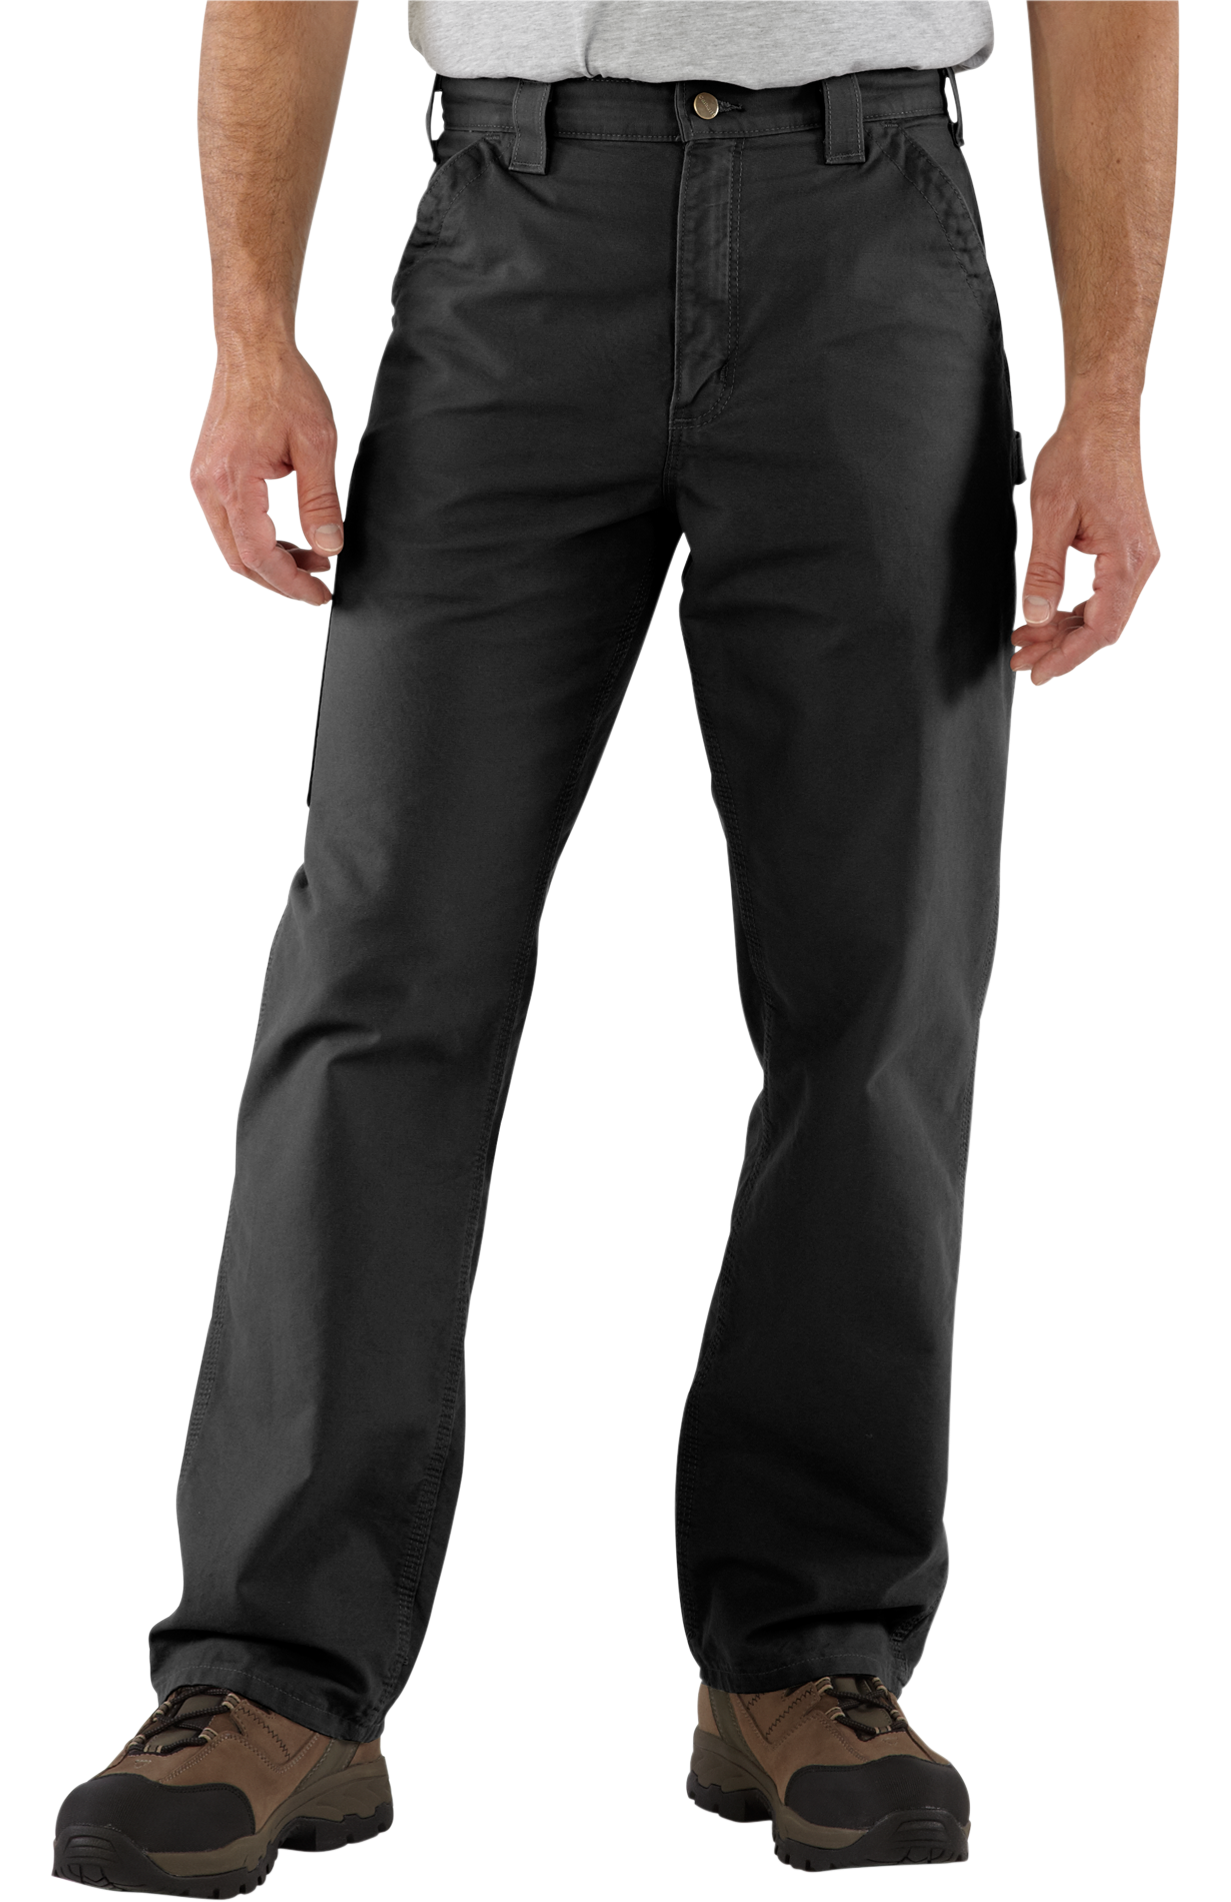 Carhartt Loose-Fit Canvas Utility Work Pants for Men | Bass Pro Shops